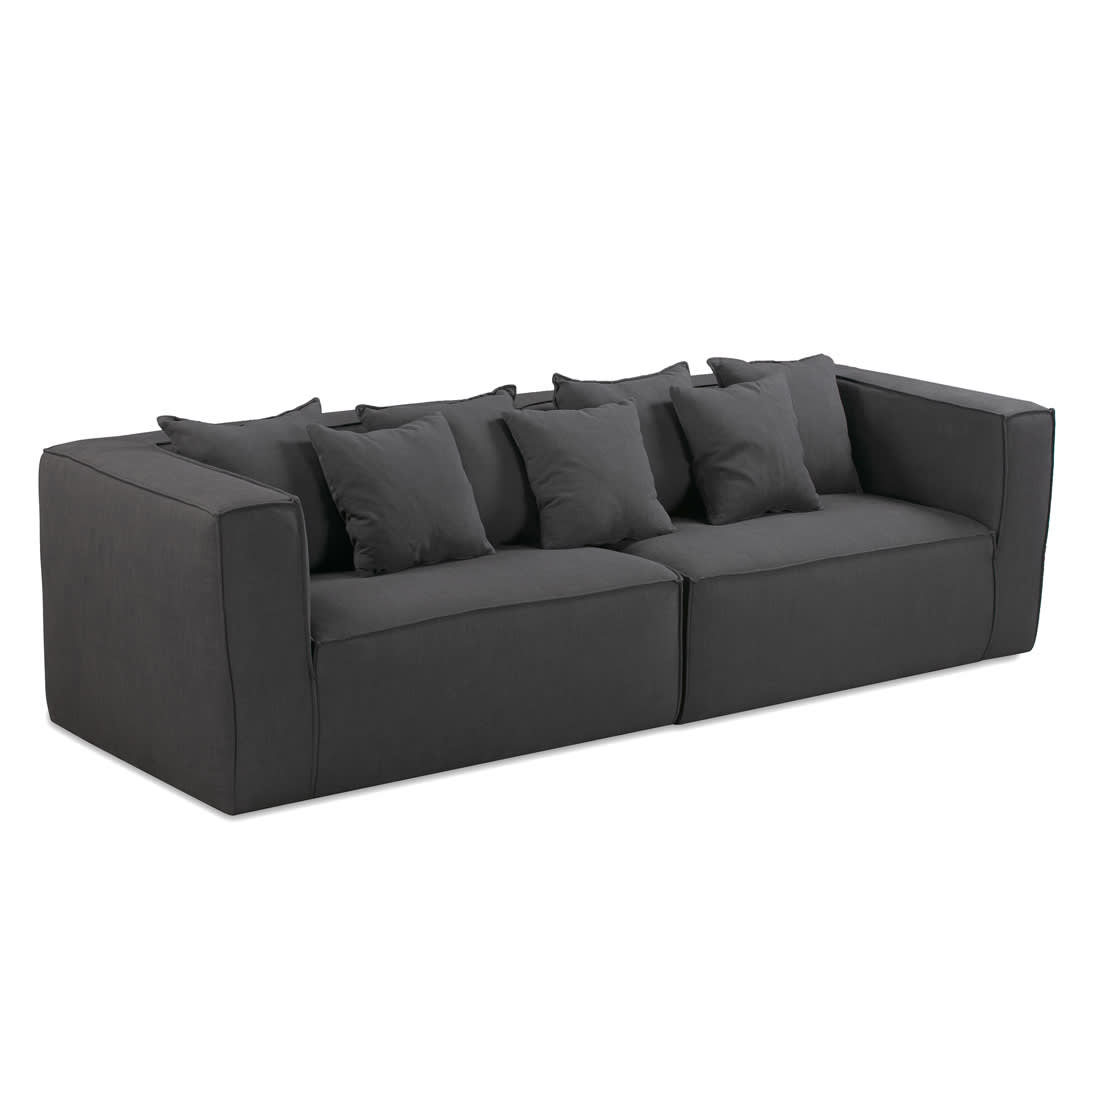 Block 4 Seater Sofa - Siena 801 Charcoal - Angle View by RJ Living